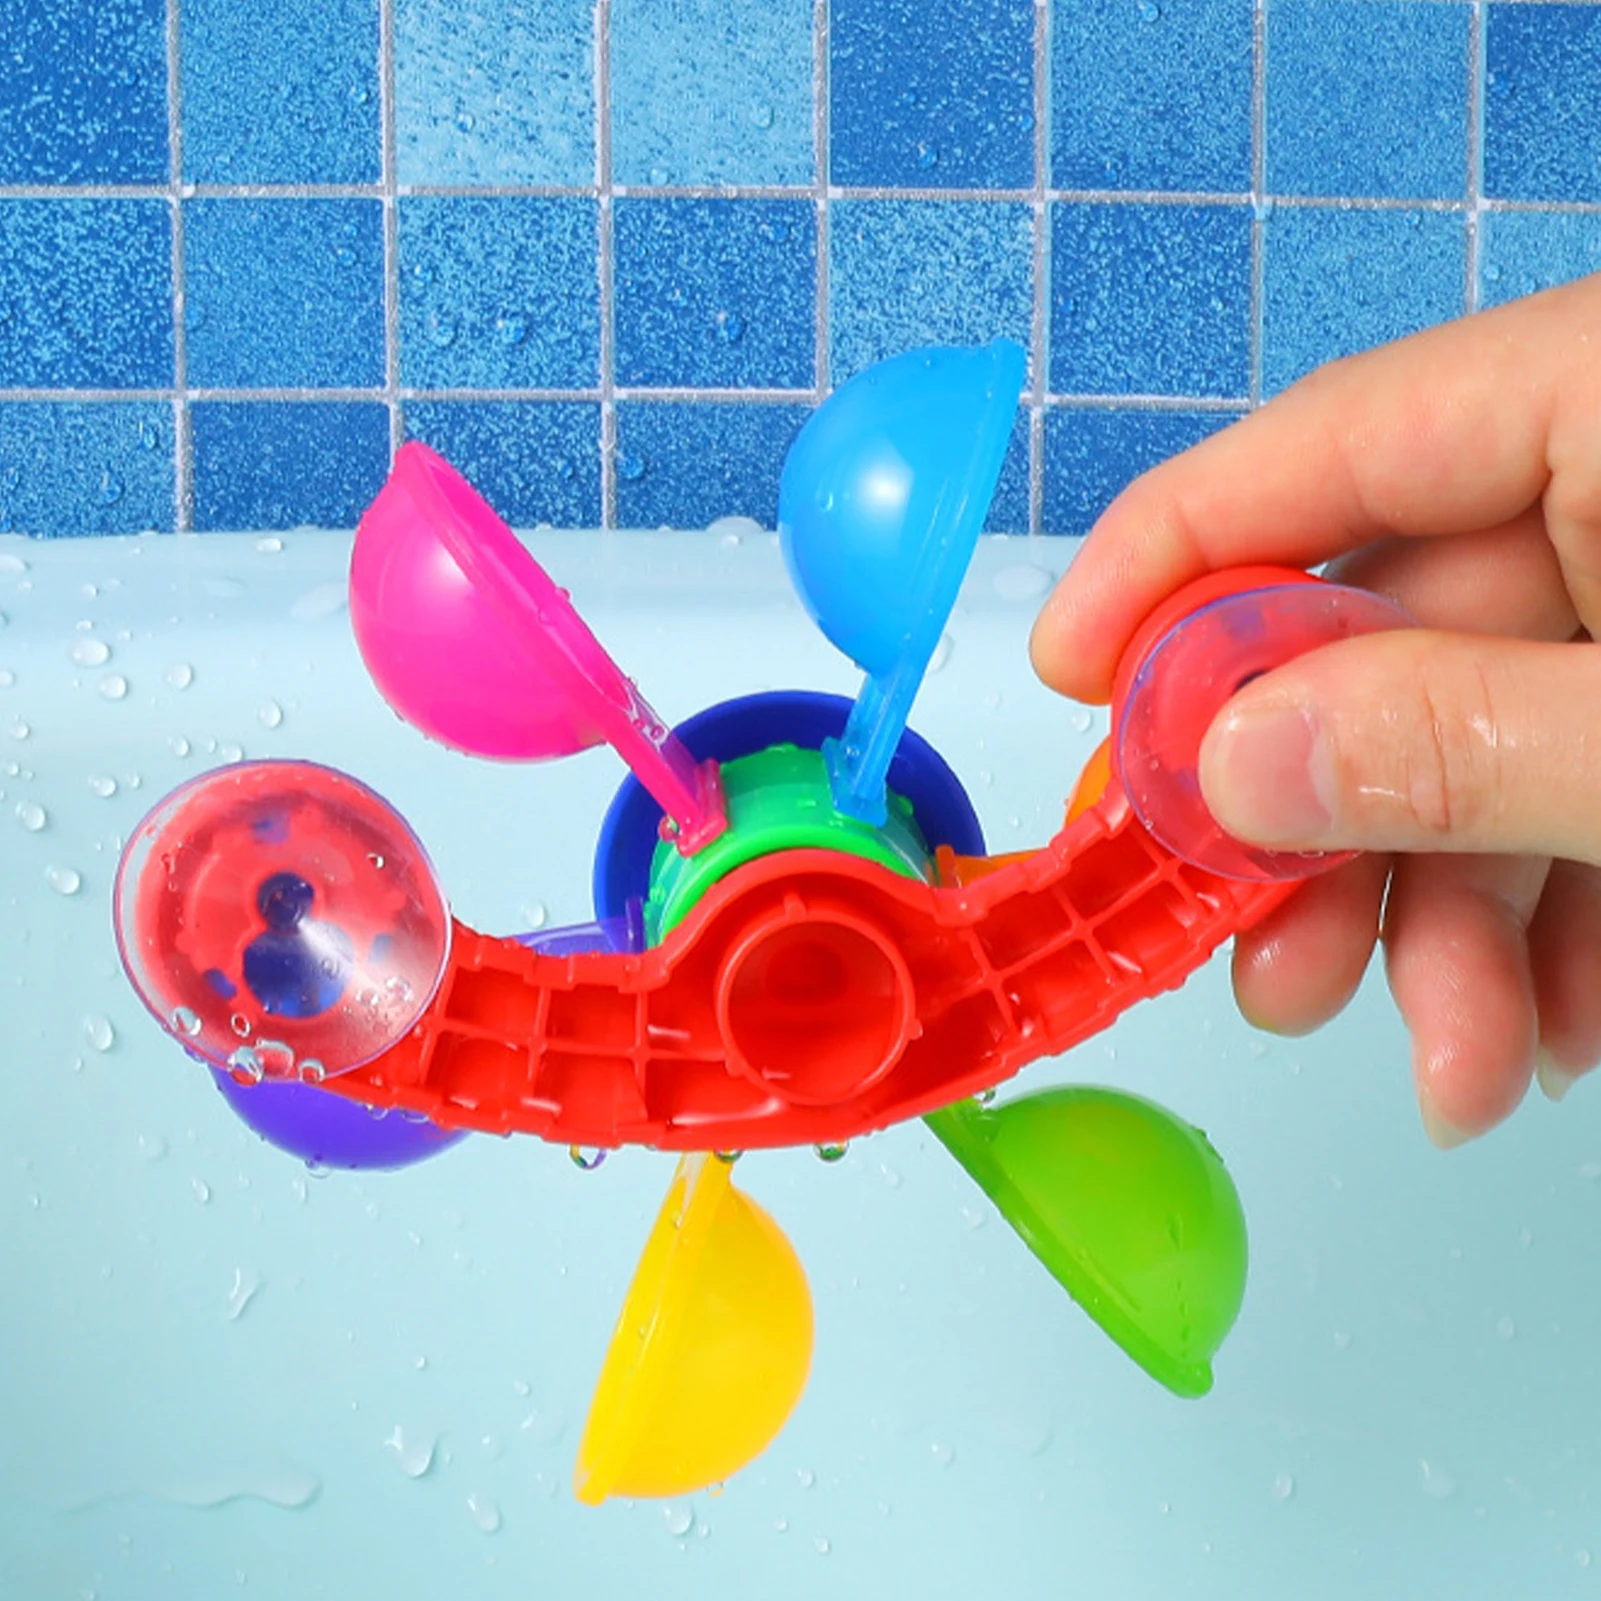 baby toddler toys for 1 year old	 Baby Bath Toys Colorful Waterwheel Bathing Sucker Bathtub Water Spray Play Set Shower Sprinkler Toy for Kids Toddler Gifts audio books for babies